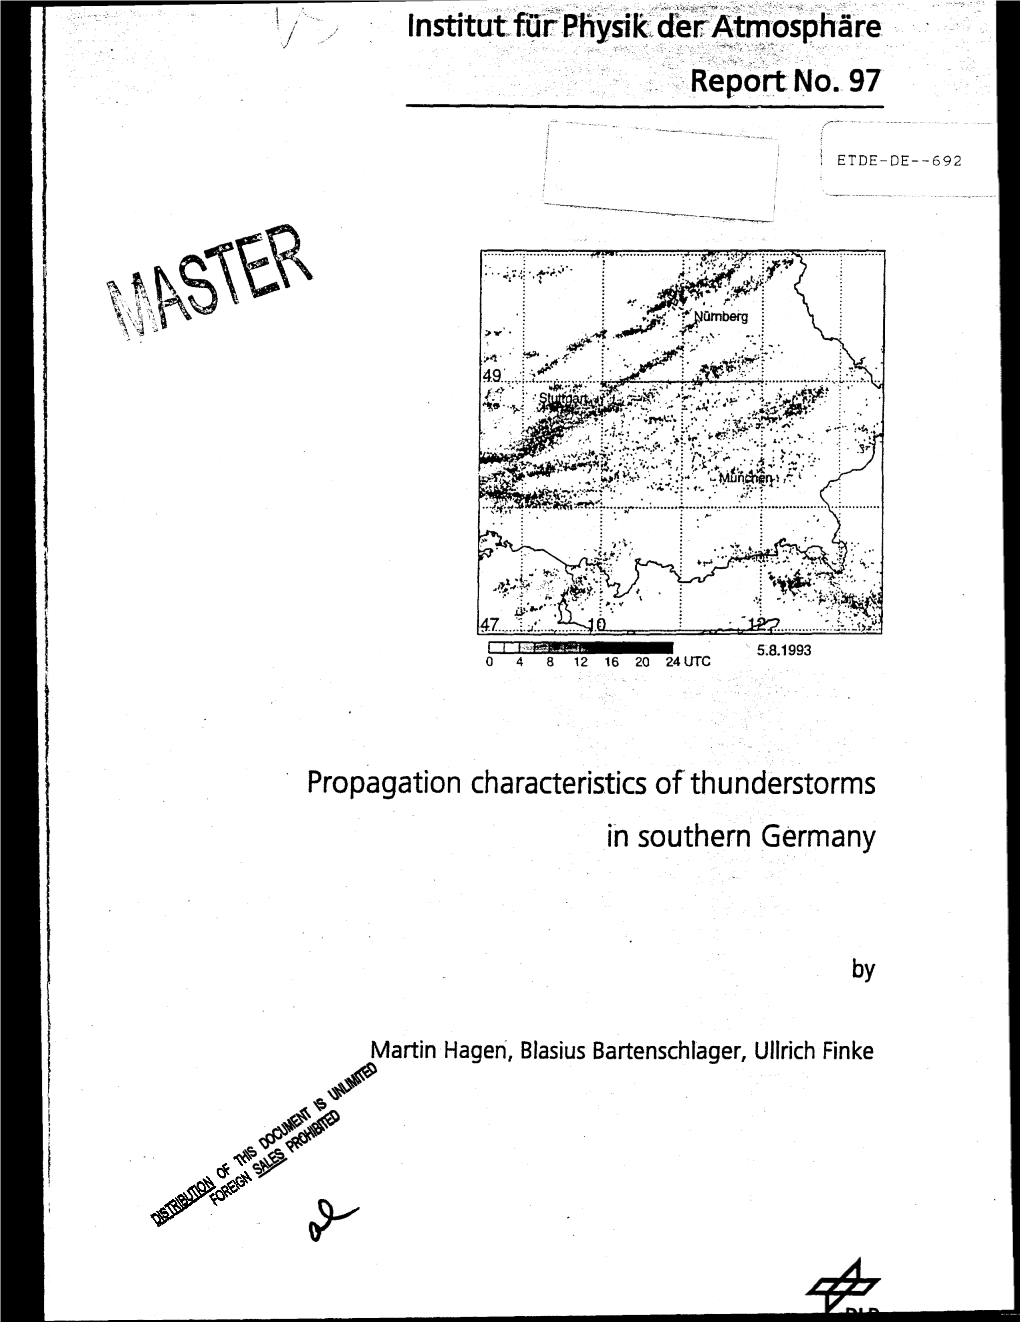 Propagation Characteristics of Thunderstorms in Southern Germany